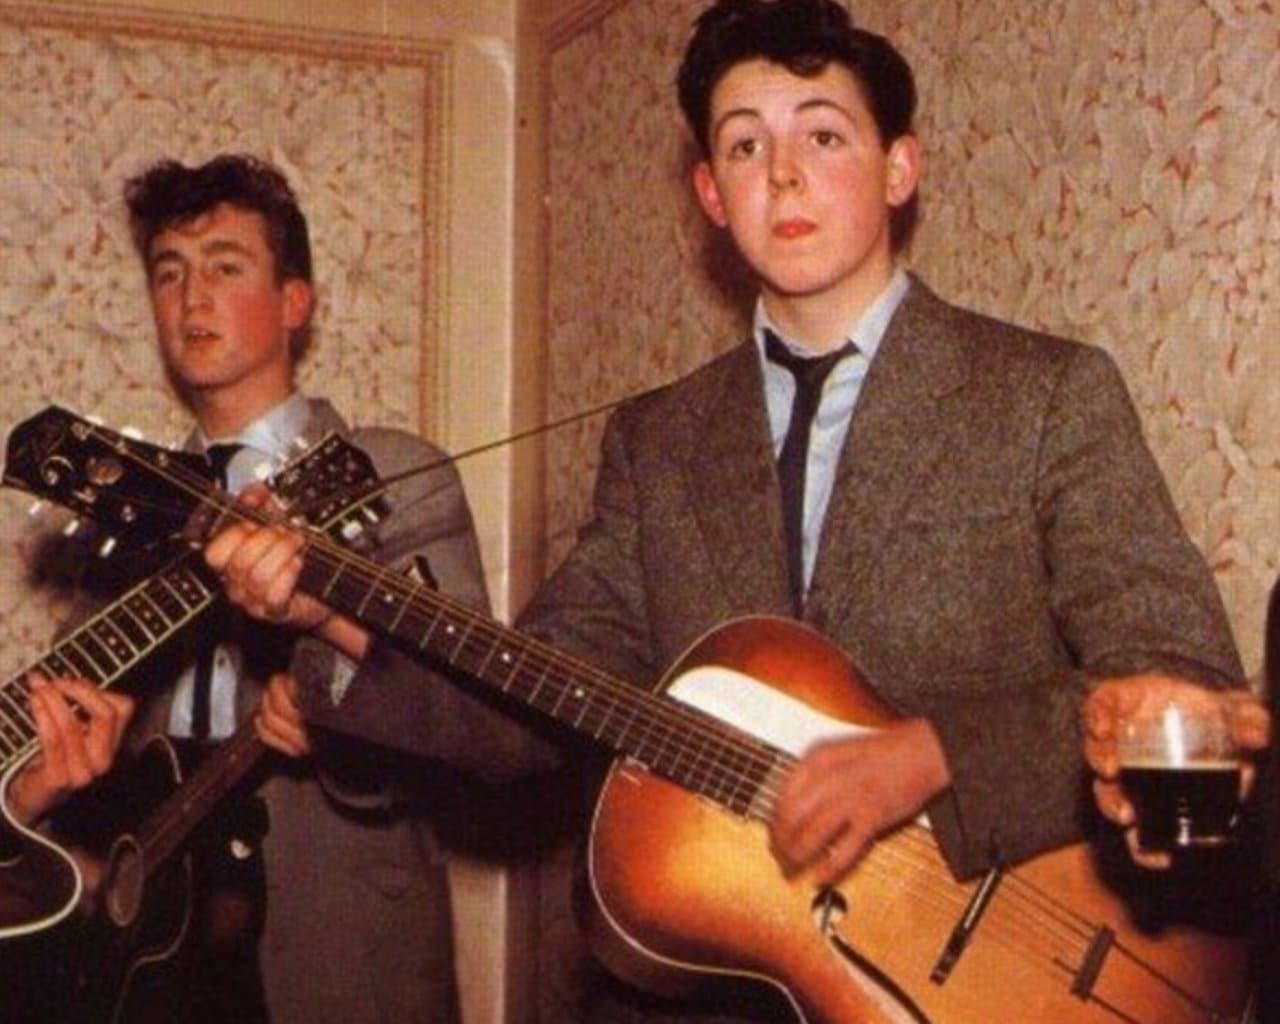 Paul McCartney with his first guitar Epiphone Zenith 17